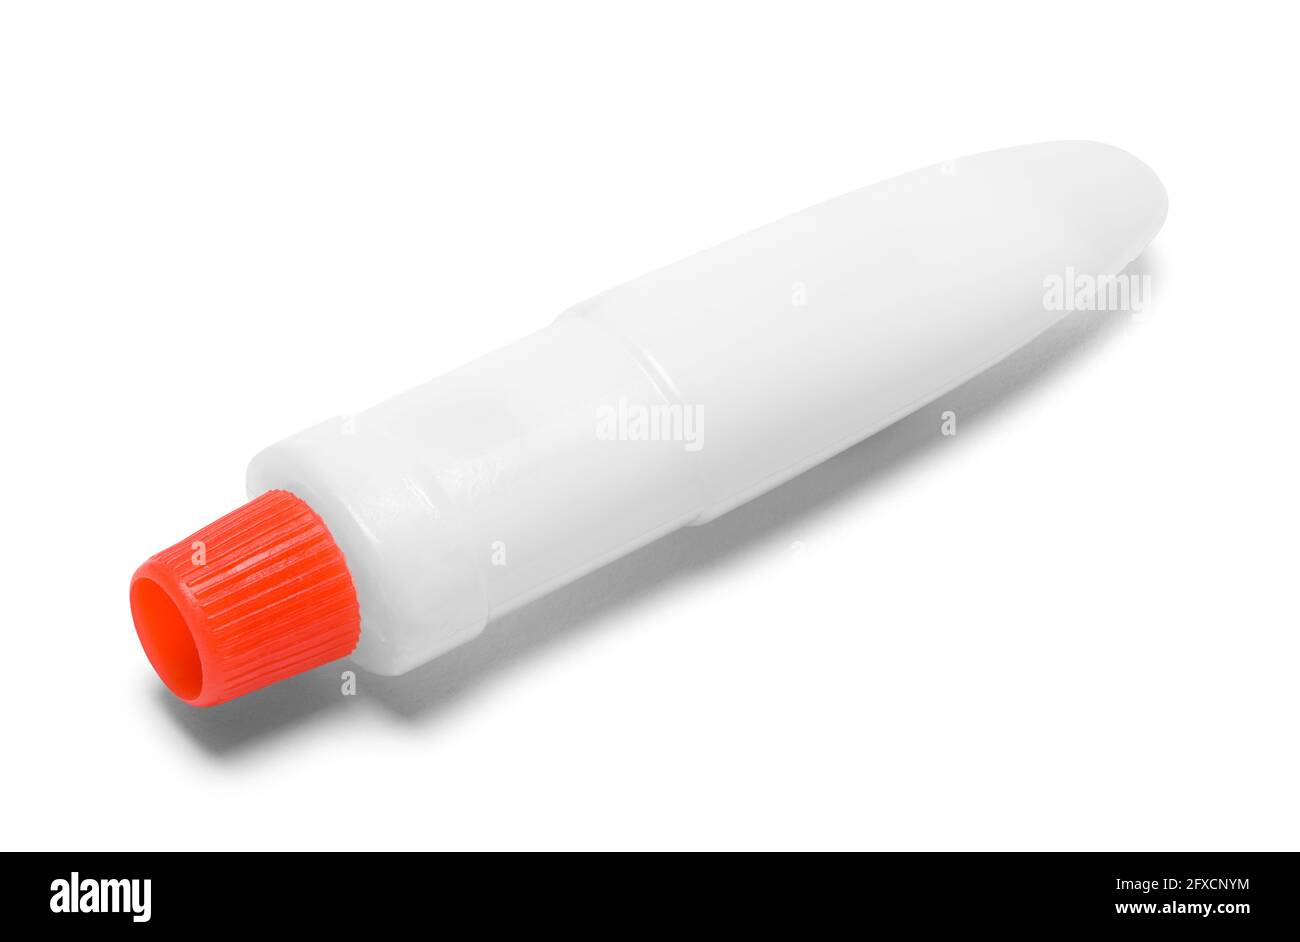 Small Tube Of Glue with Orange Lid Cut Out. Stock Photo